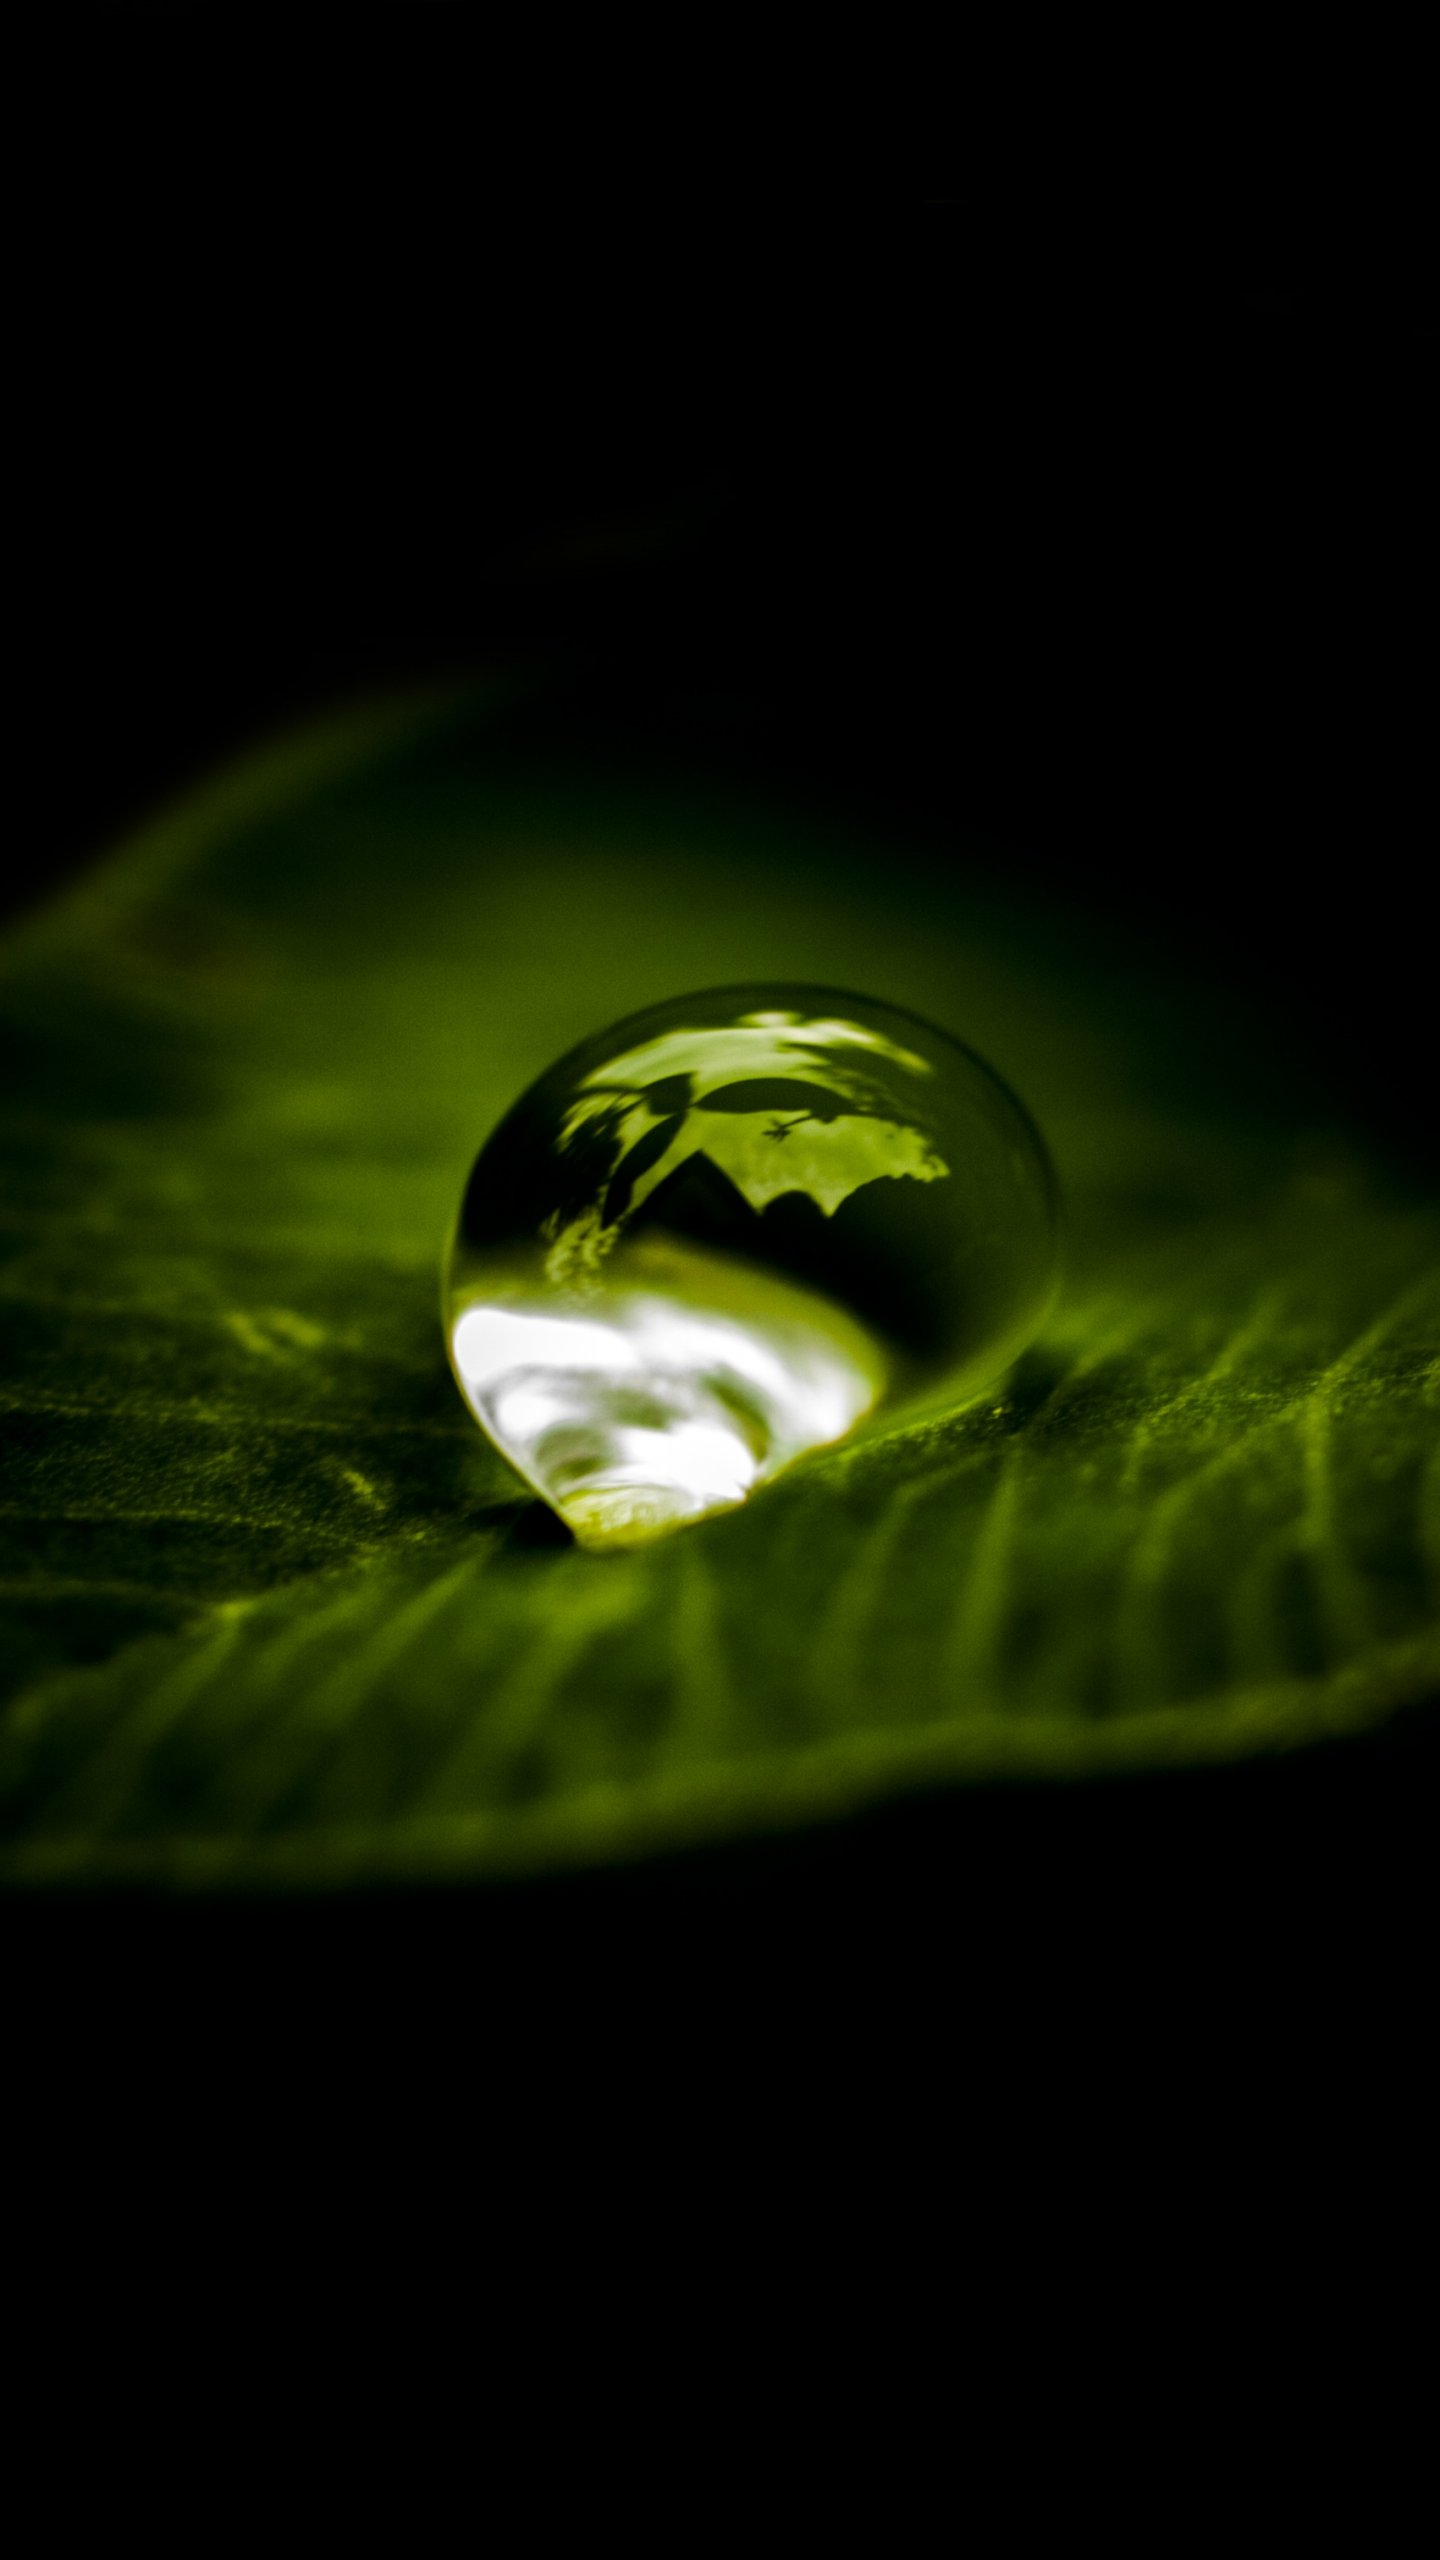 Waterdrop On Leaf Wallpaper Iphone, Android And Desktop - Brings Us To Tears Will Lead Us , HD Wallpaper & Backgrounds